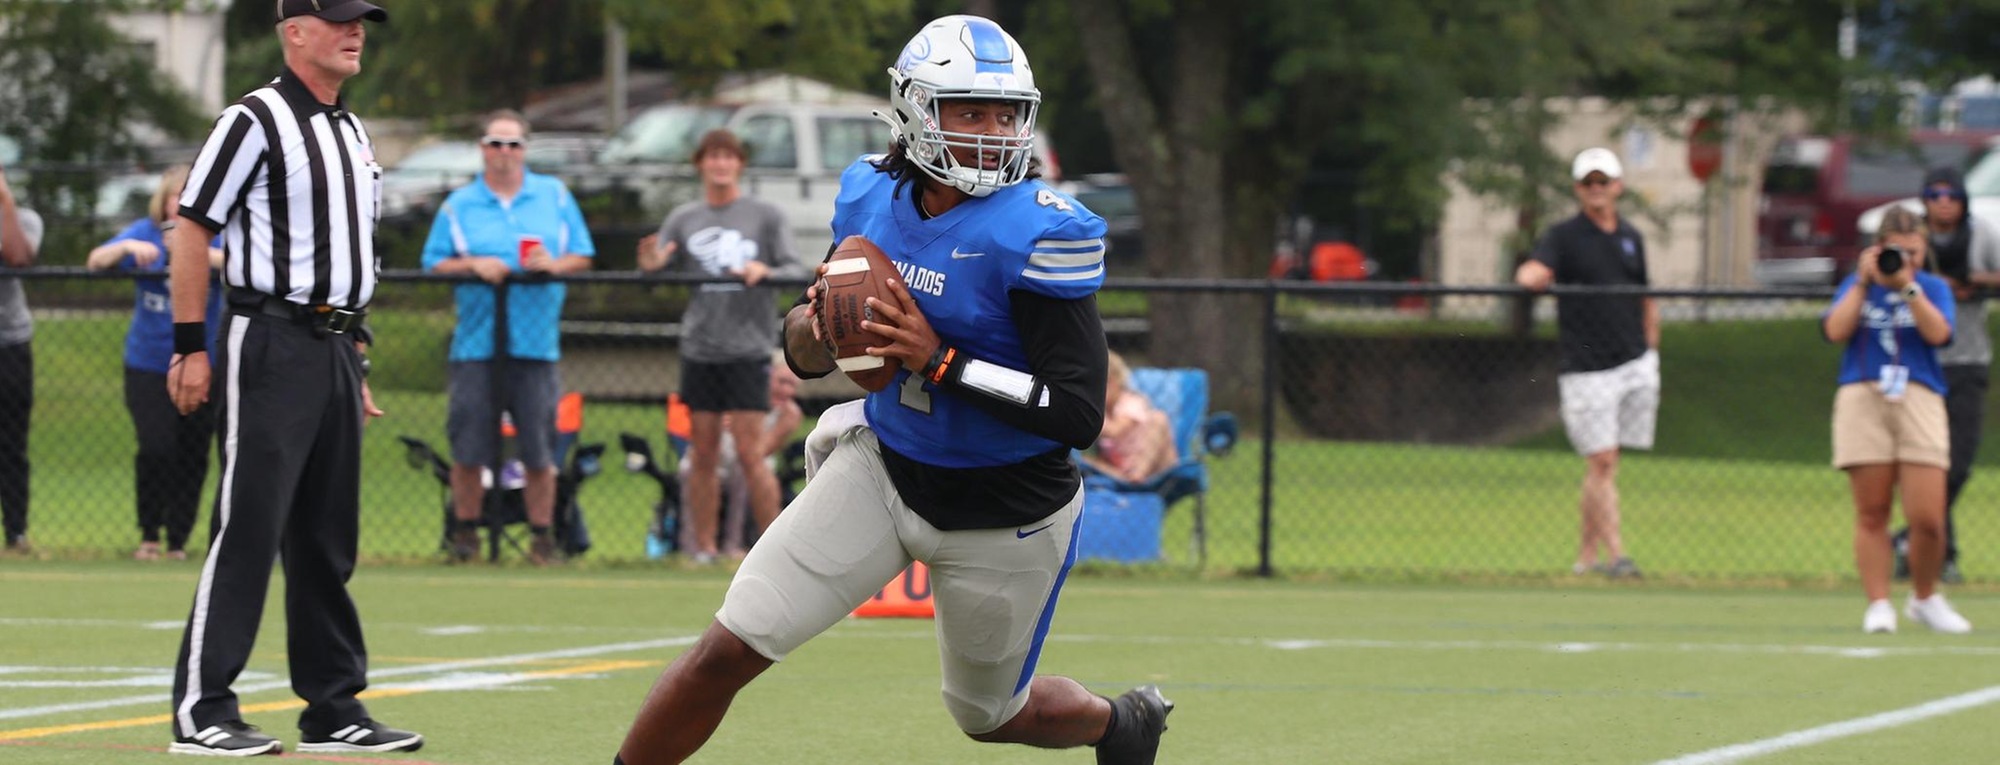 Hayes, O’Leary Spark Big First Half to Push Brevard to First Win of 2022, 31-13